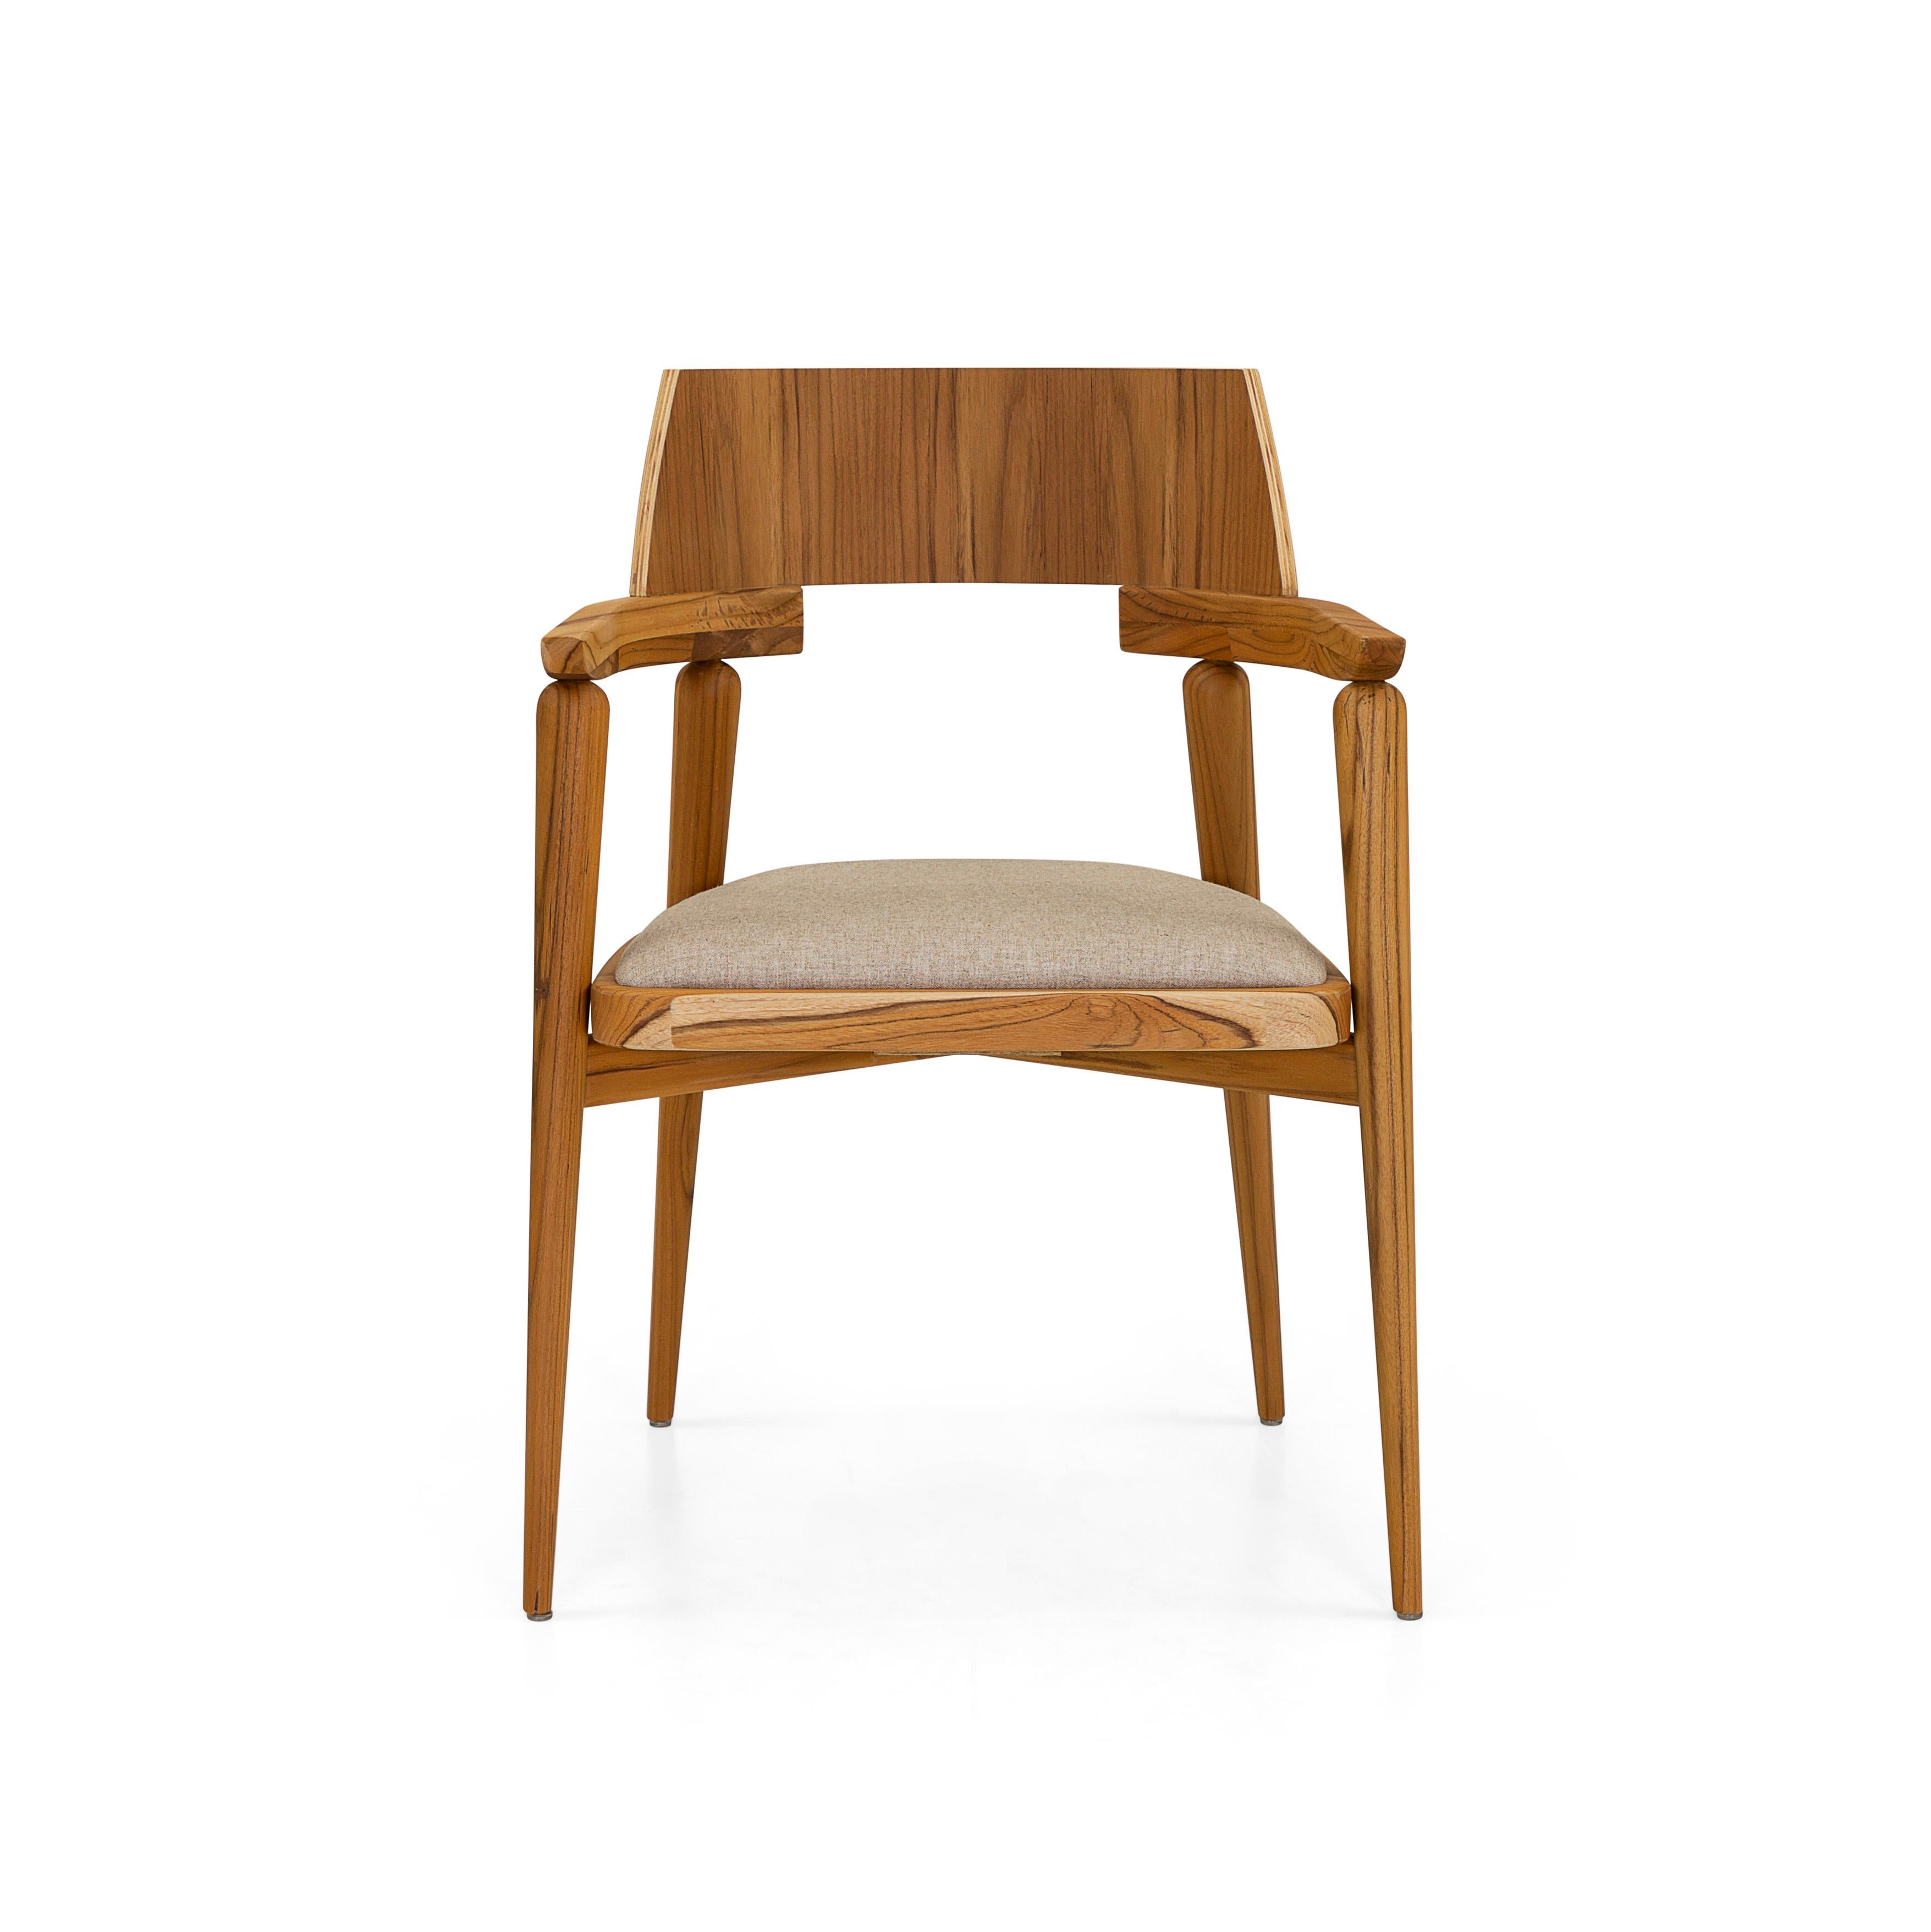 The Bone dining and desk chair is yet another Uultis case piece that combines style and functionality with its structure of solid wood in a teak finish, the backrest in anatomically curved multi-laminated sheet, and a medium-density foam seat